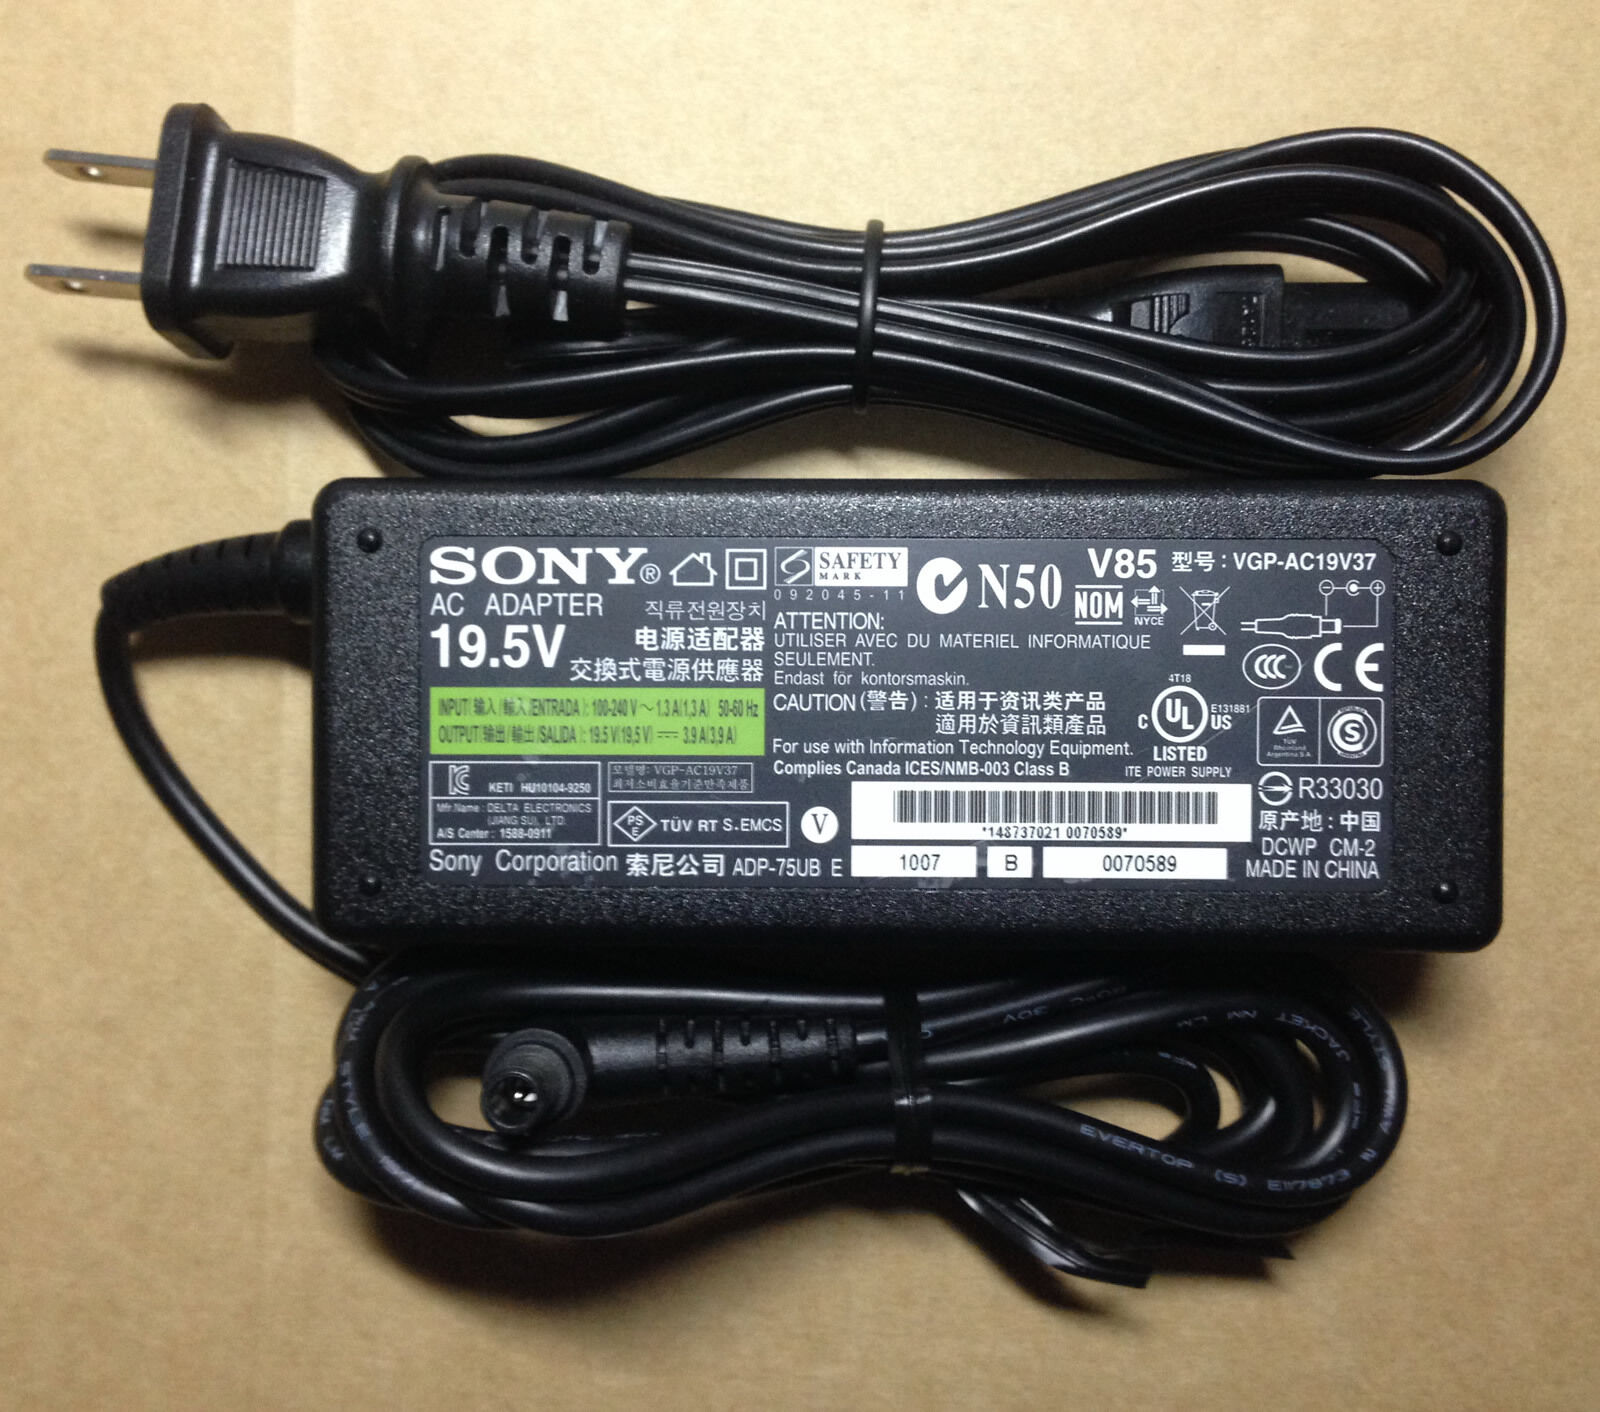 Original OEM AC Adapter Power Cord Charger for Sony Vaio VGP-AC19V38/VGP-AC19V37 Modified Item: No Compatible Produc